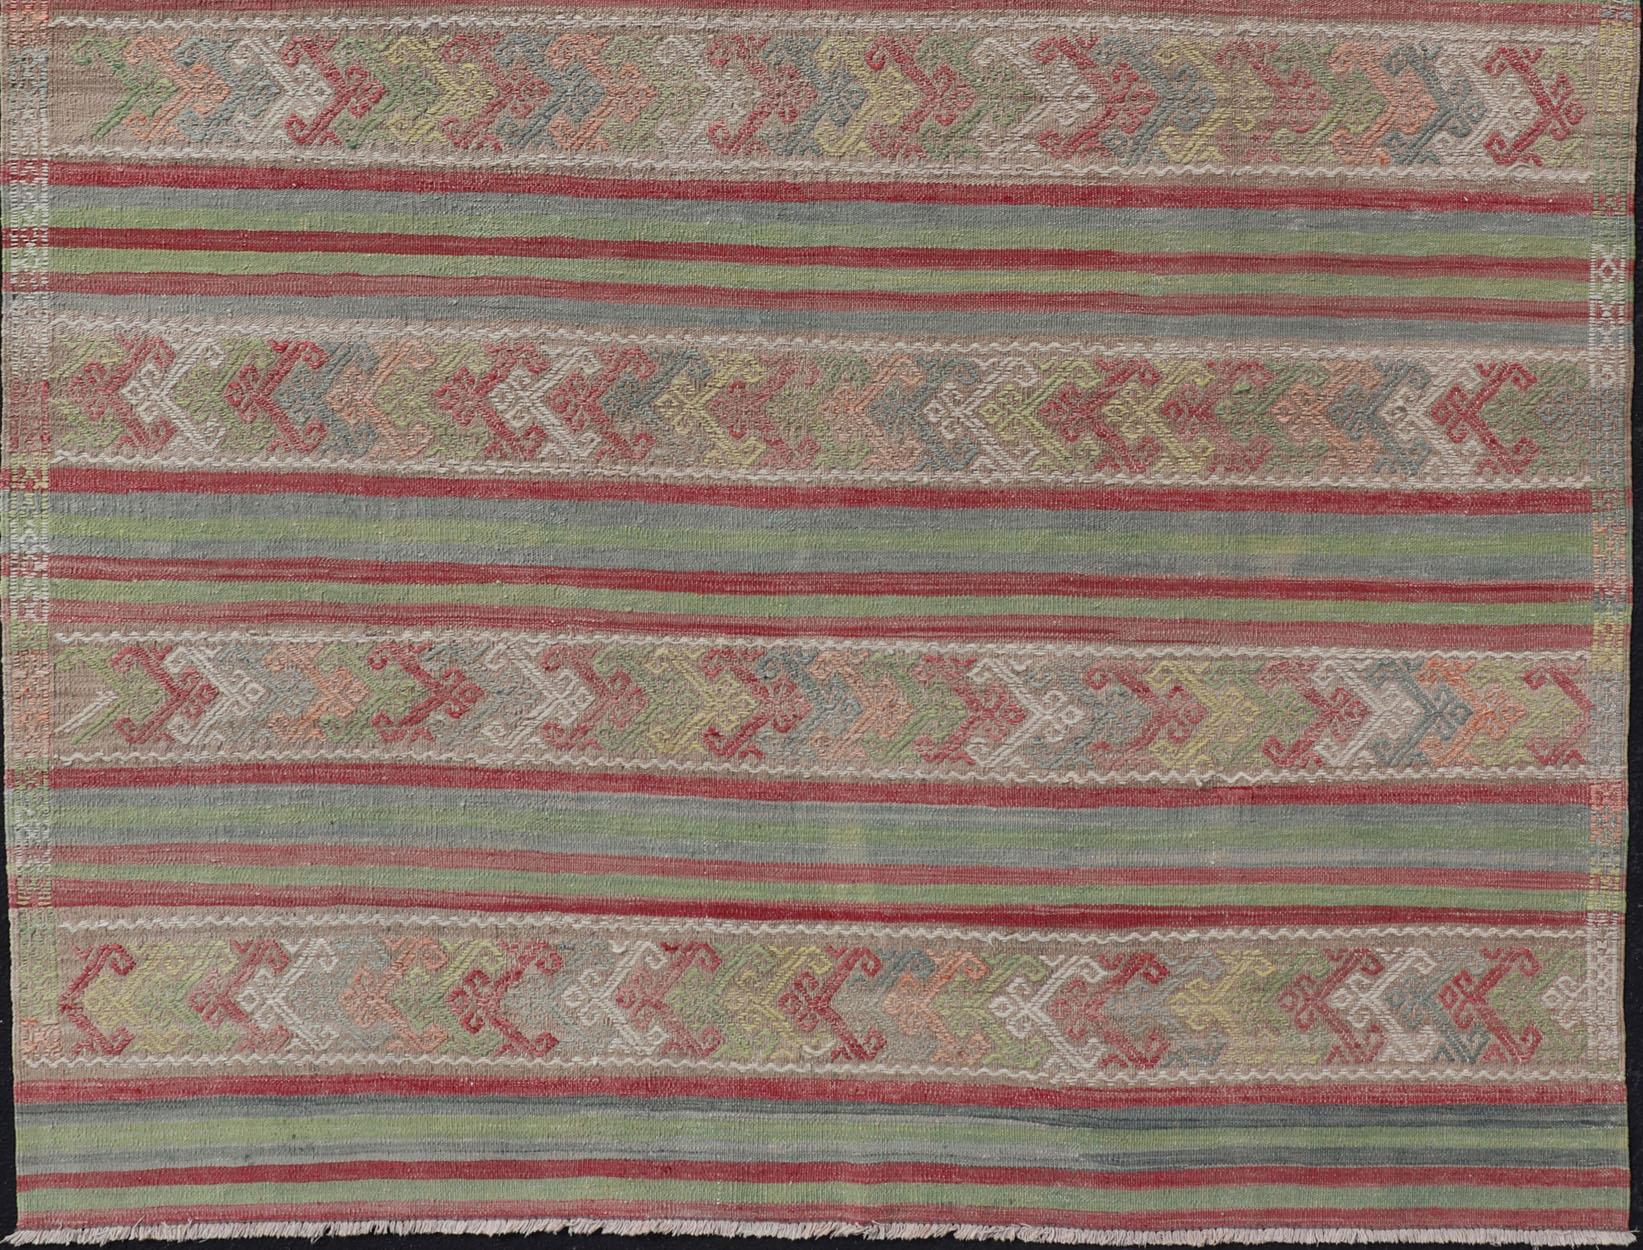 20th Century Colorful Vintage Embroidered Kilim with Stripes and Alternating Geometric Motifs For Sale